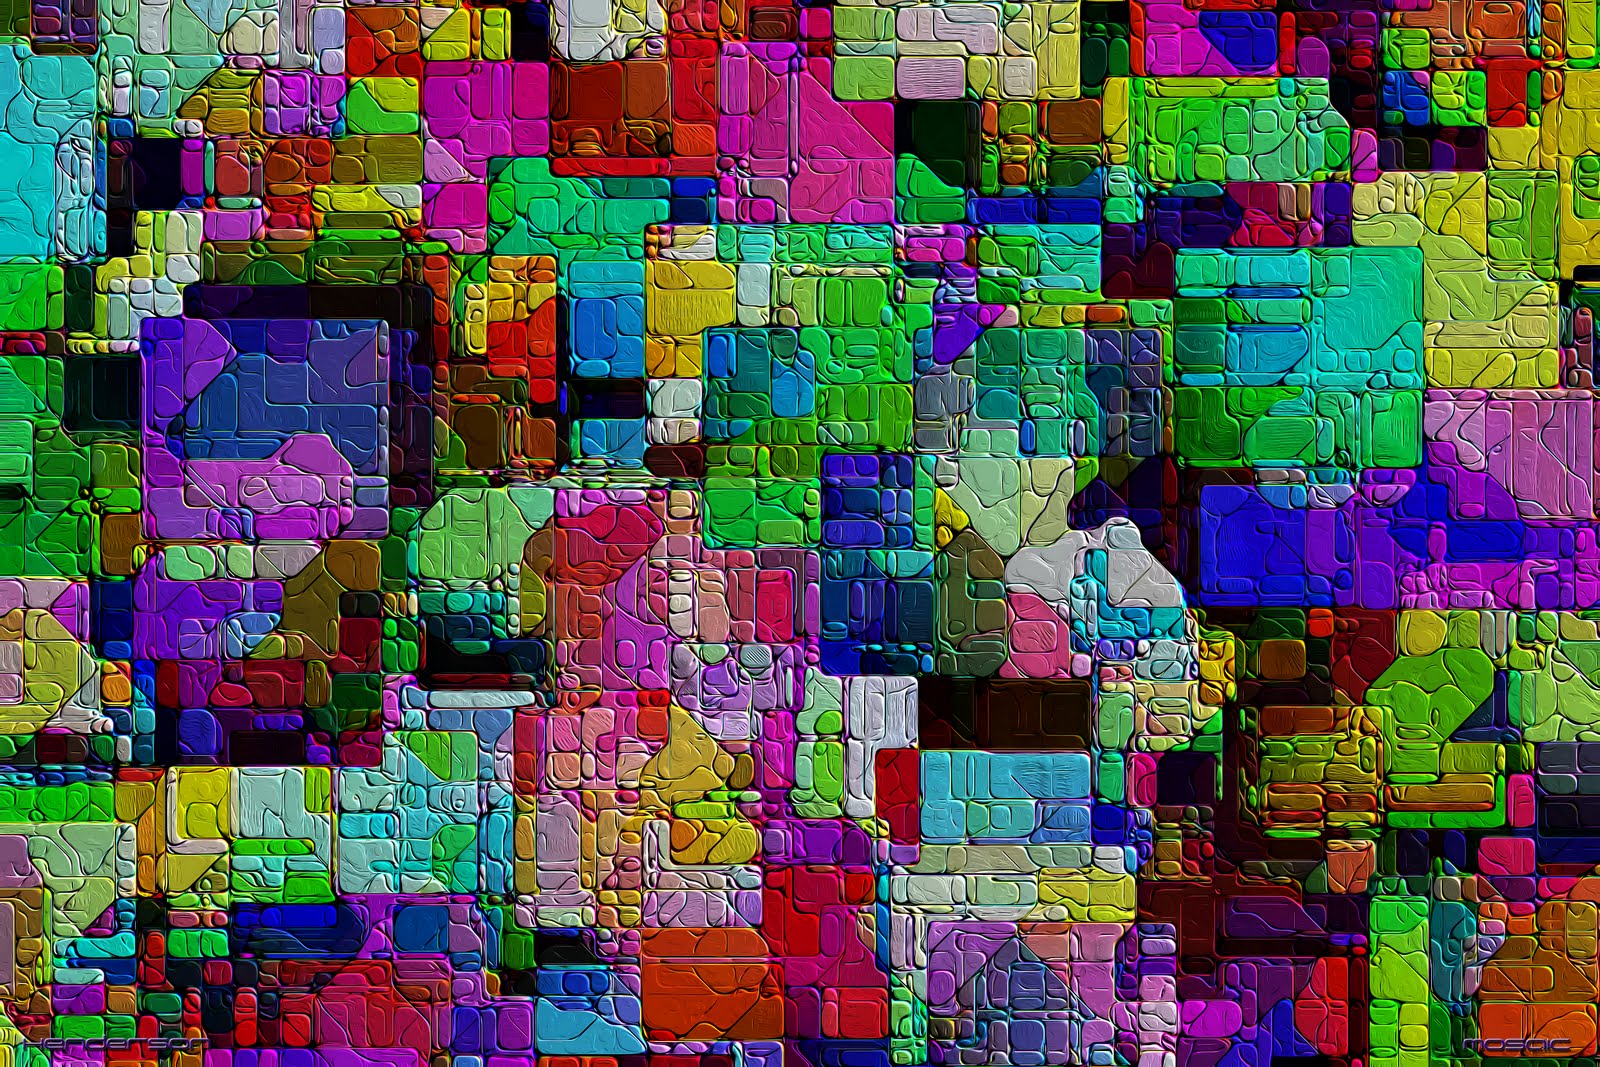 Mosaic Art Wallpaper Here You Can See Colorful Abstract